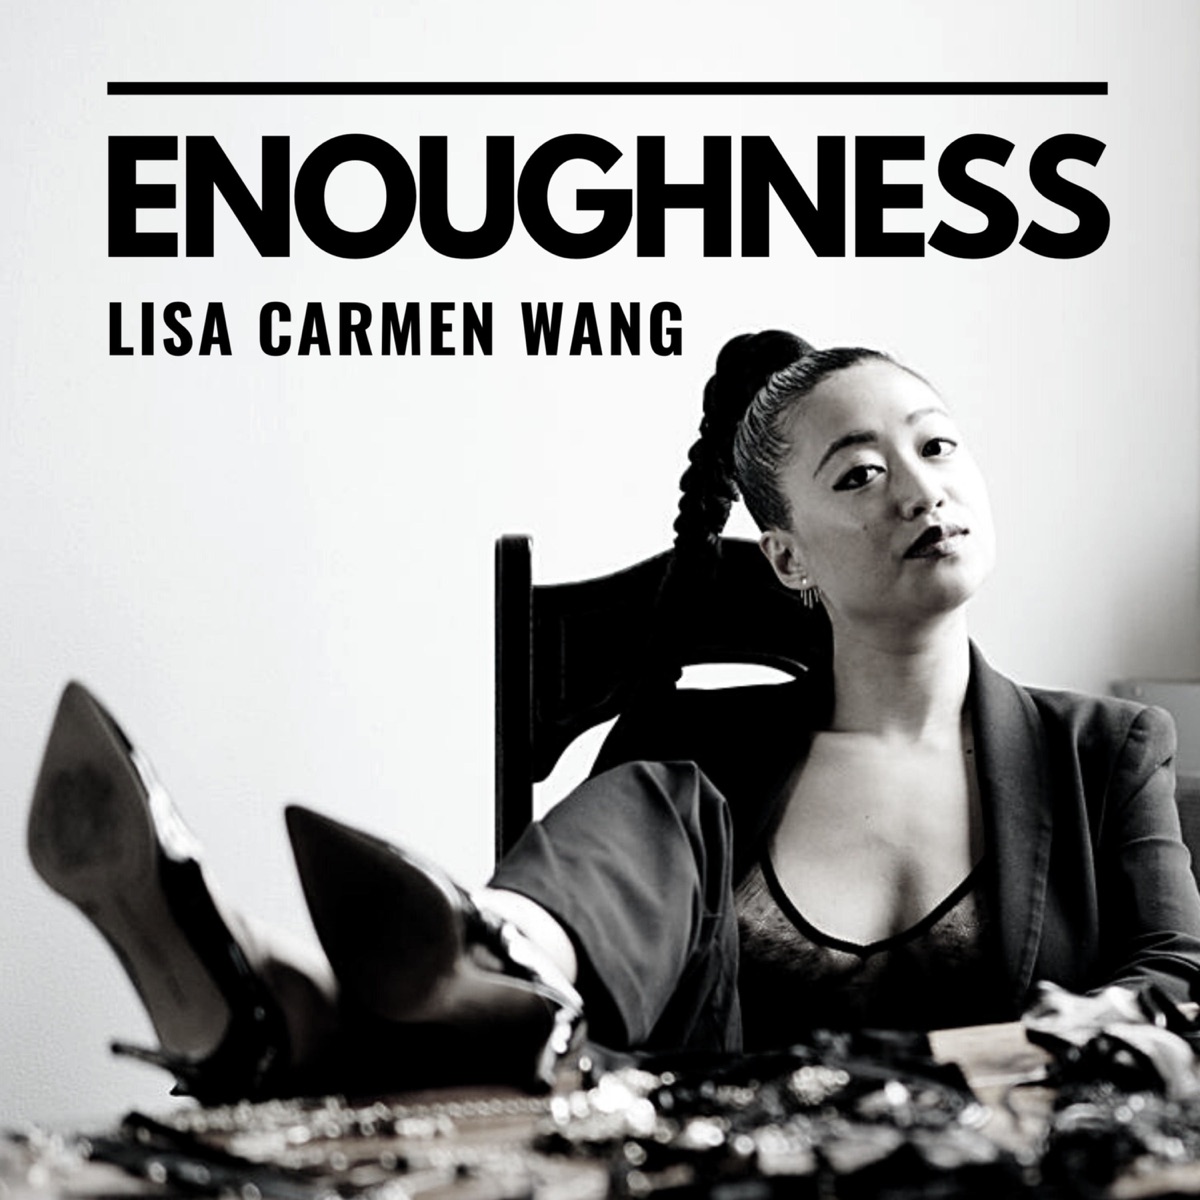 Enoughness with Lisa Carmen Wang â€“ Podcast â€“ Podtail